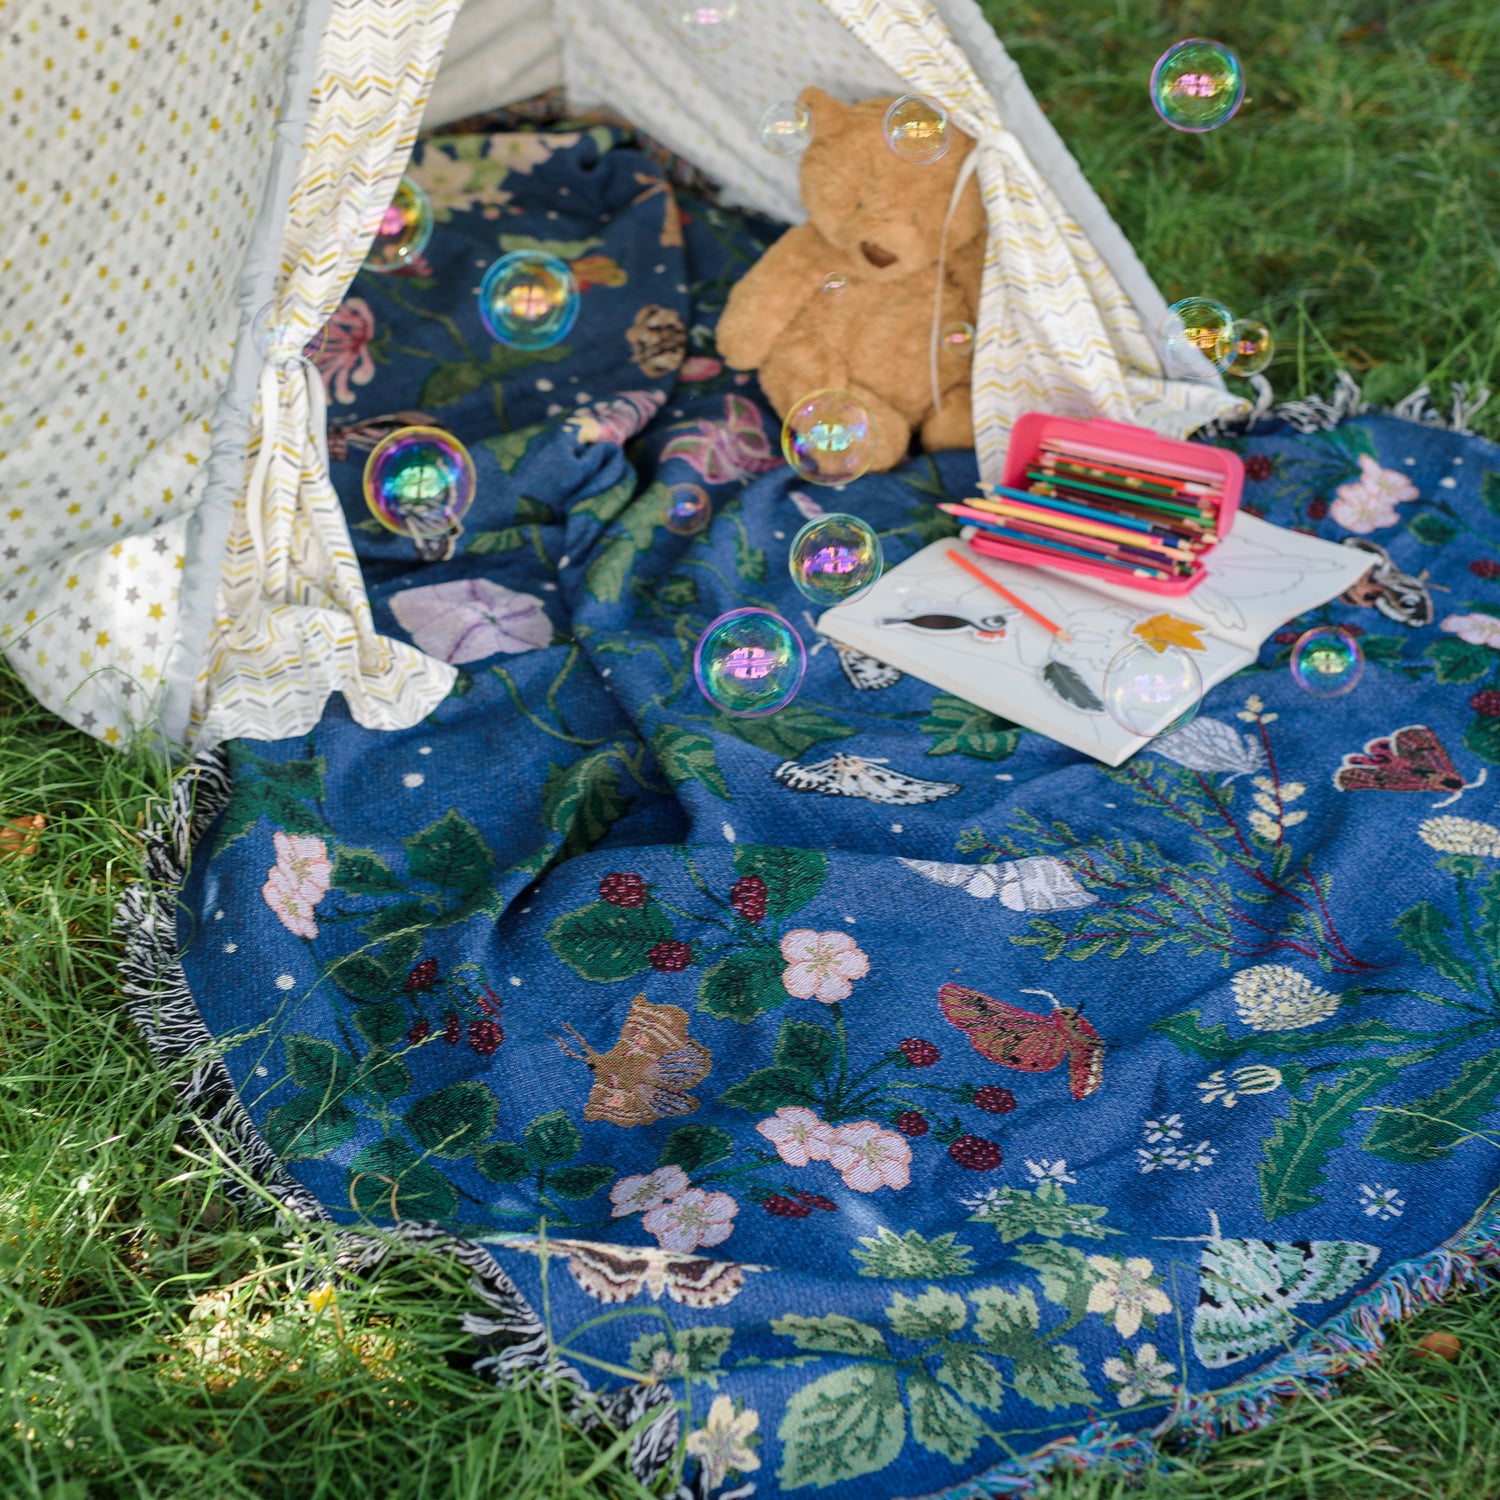 deep blue woven blanket with intricate moth and flower design being used as a magical picnic blanket with child&